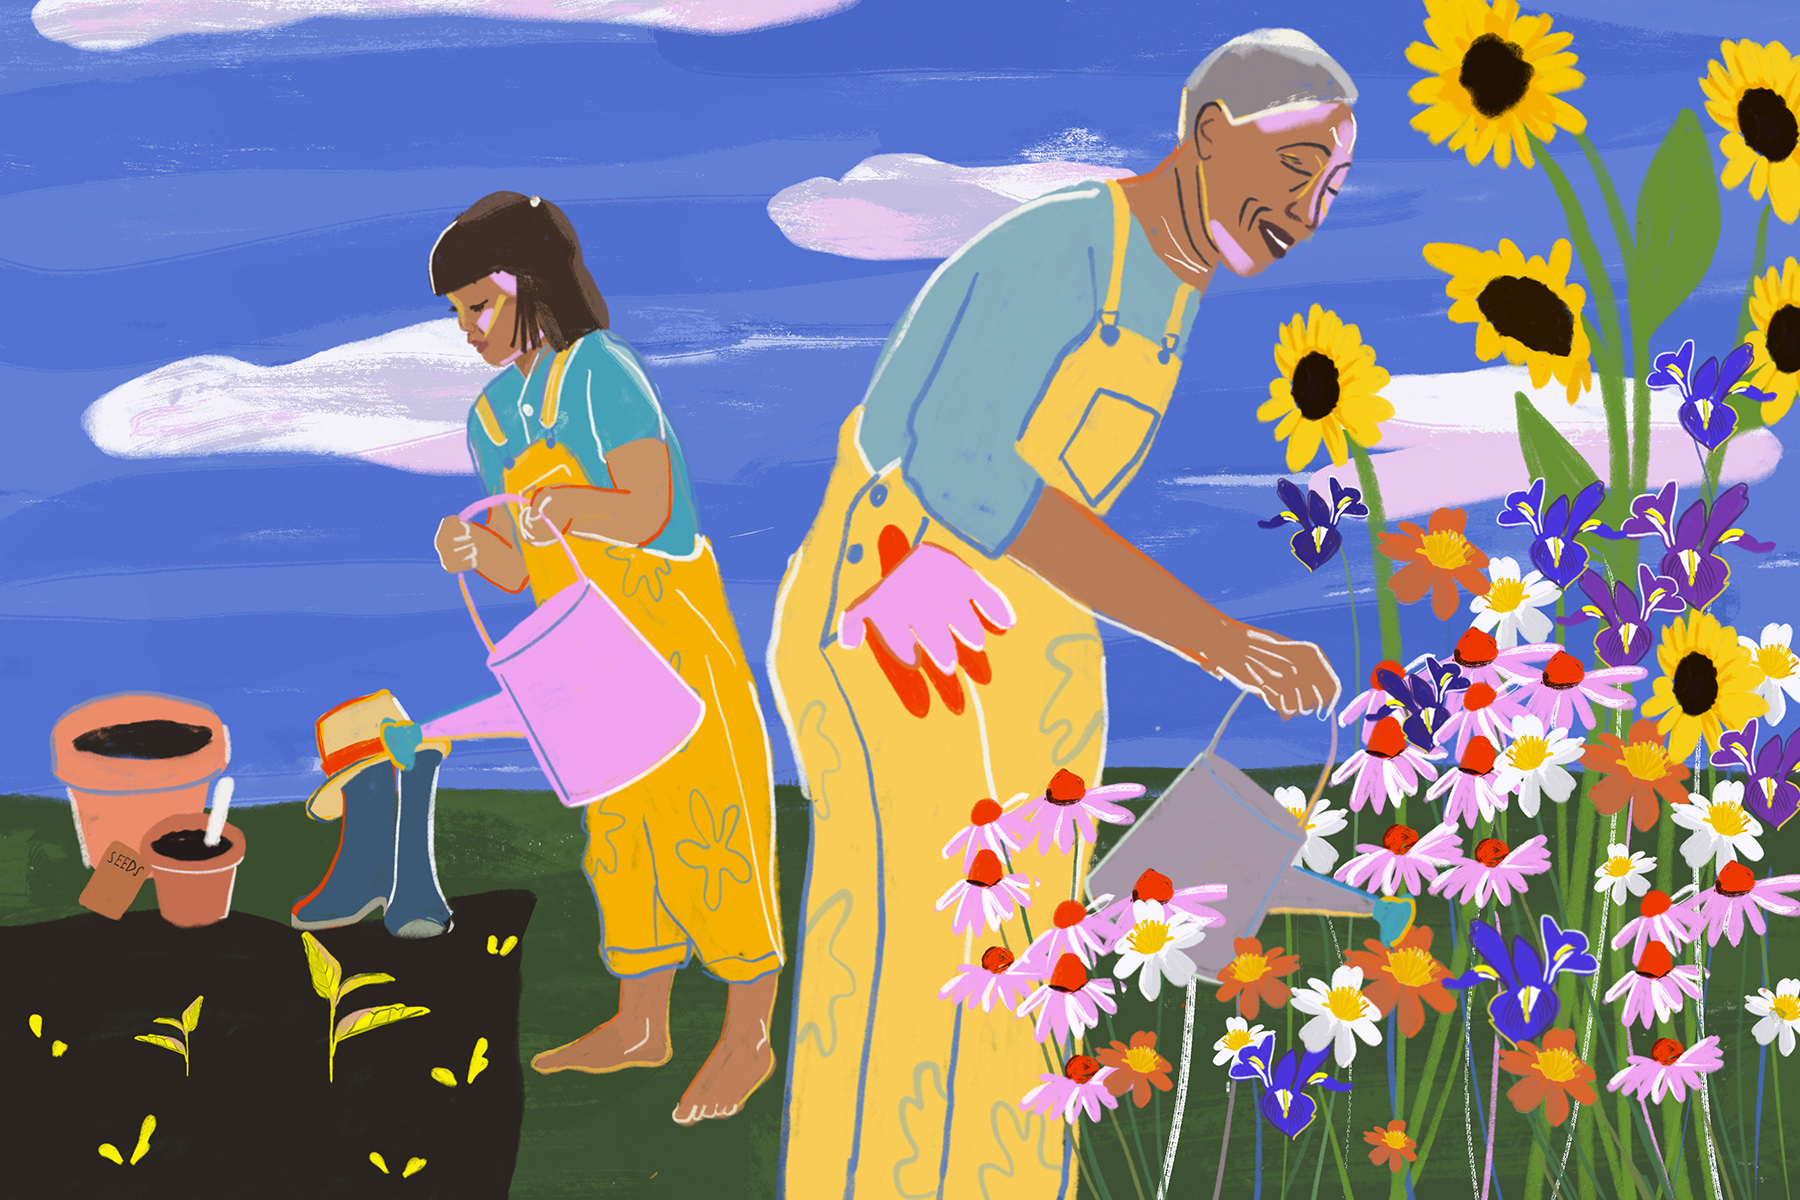 An impressionist illustration of two people gardening, a young person on the left, and an older one on the right. The younger is watering seedlings, whereas the older is watering a full flower bed